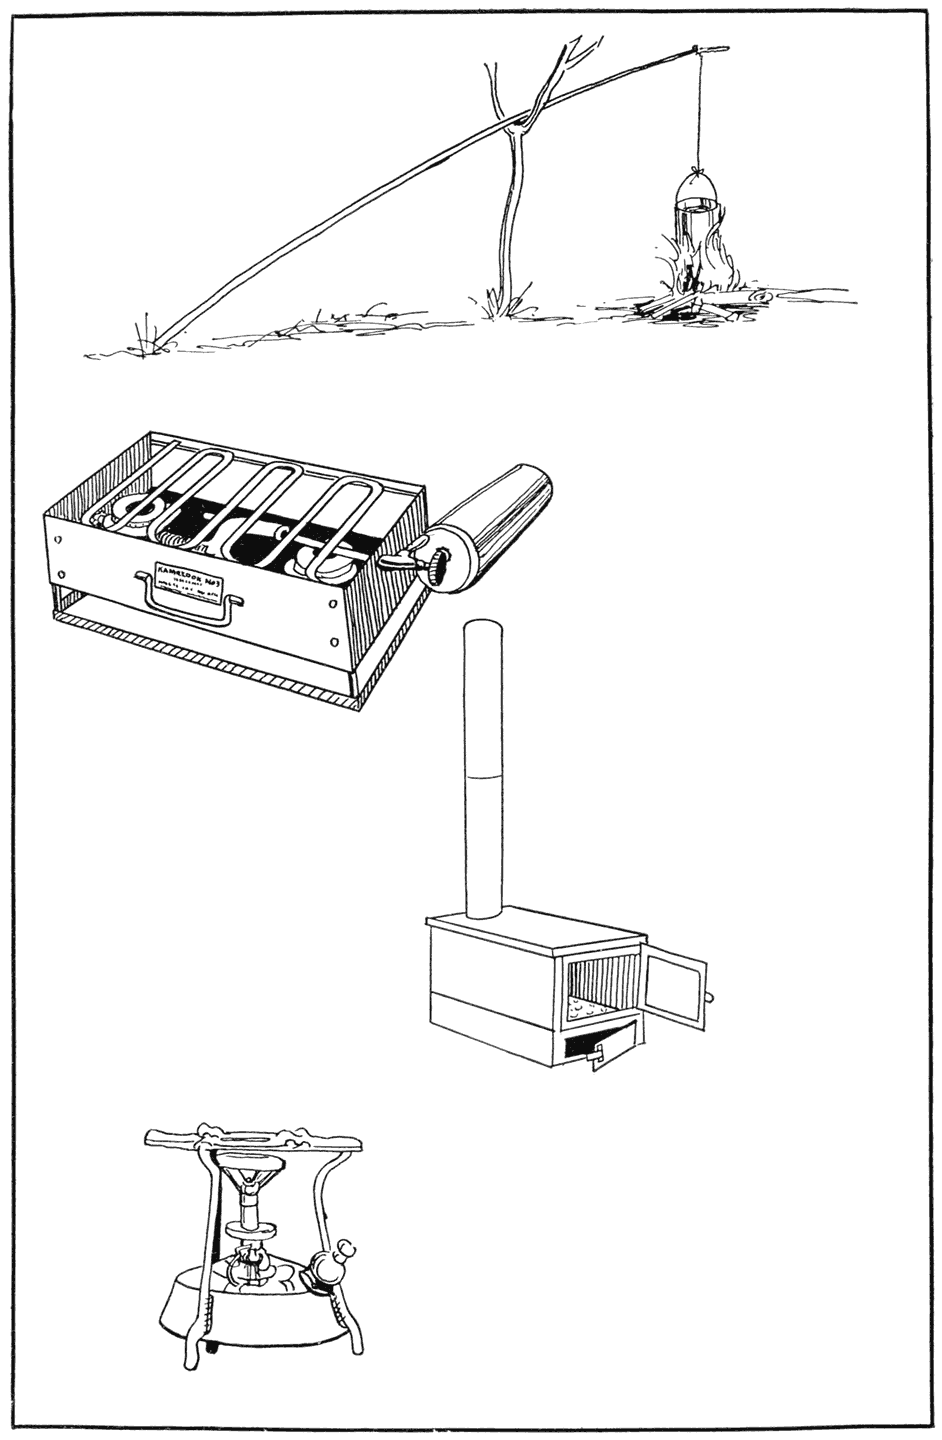 Various kinds of cooking apparatus. At the top is the dingle stick;
immediately below is the Kampkook gasoline stove; to the right
of the Kampkook is the Livingood stove burning solid fuel and
having the advantage of folding into a flat form when not in use.
At the lower left is the Juwel, a kerosene burner.